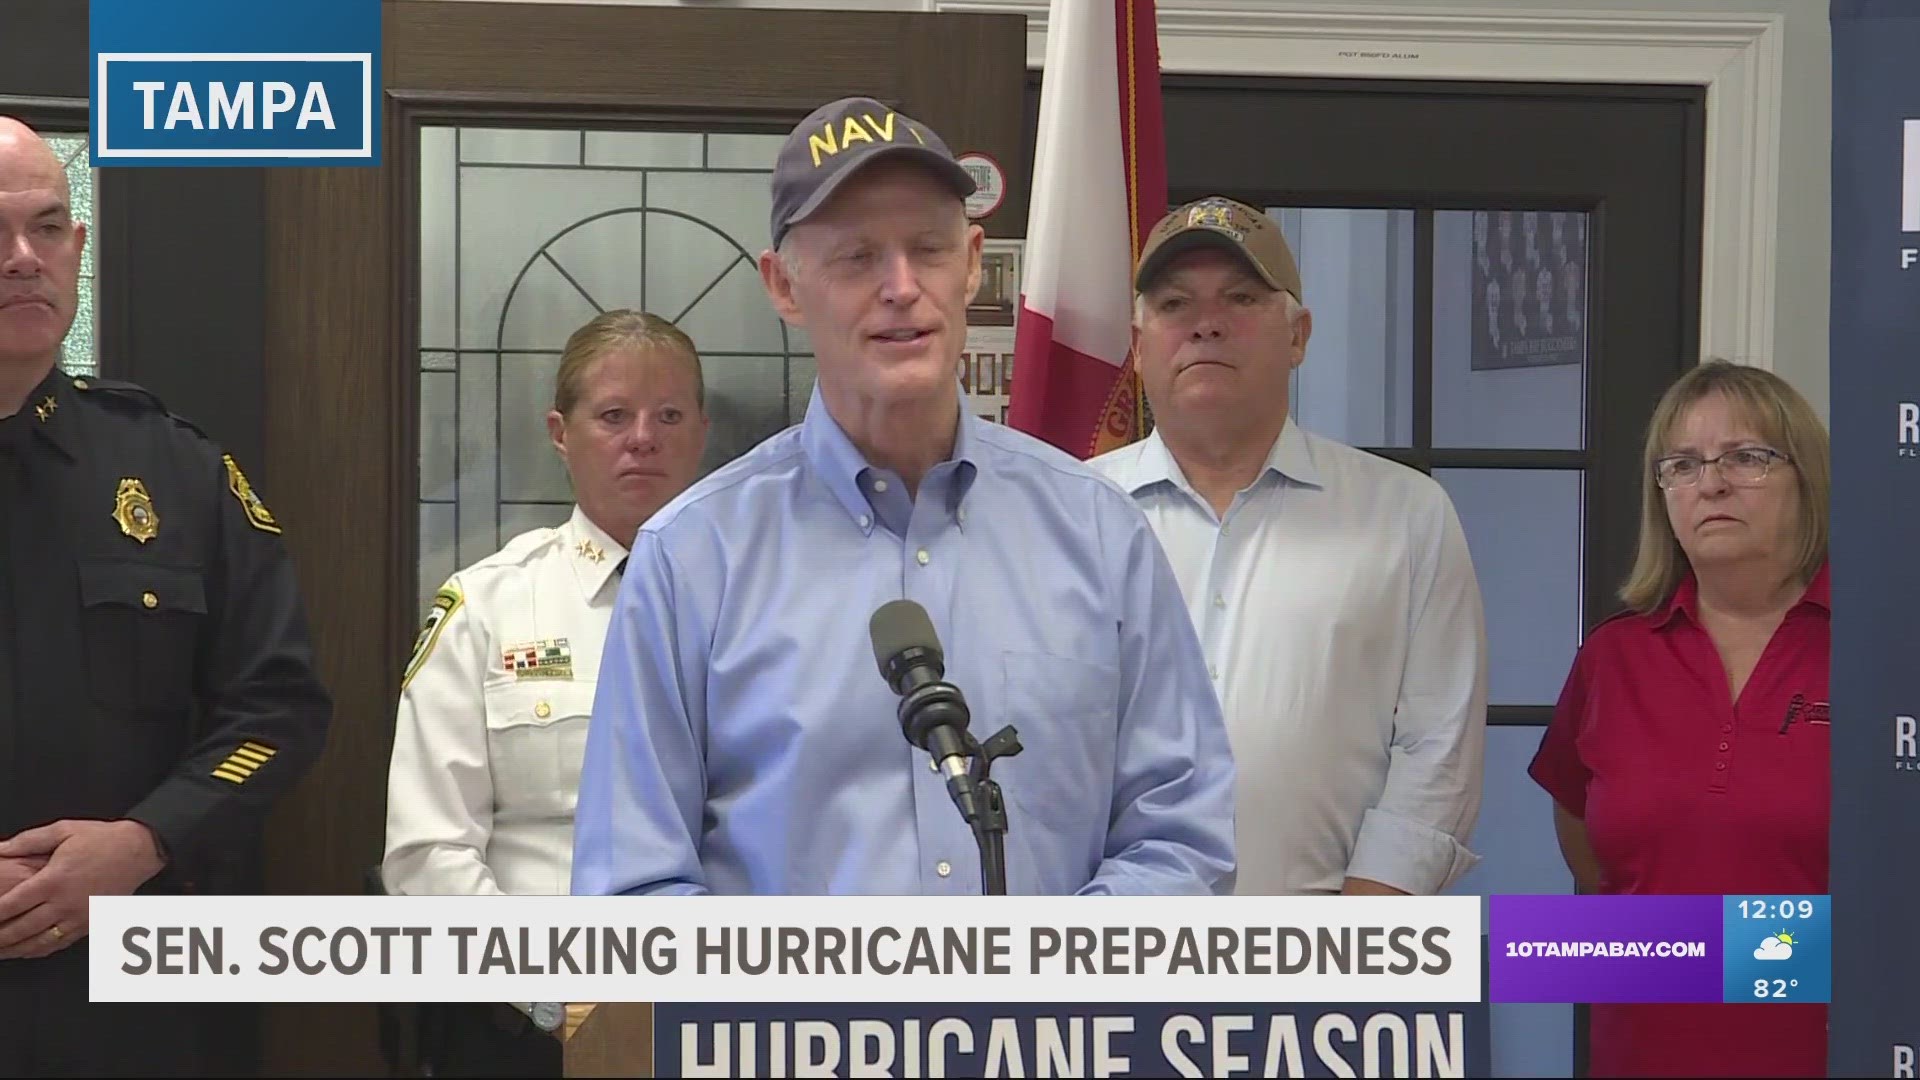 Scott met with emergency management officials about the importance of preparing for hurricane season.